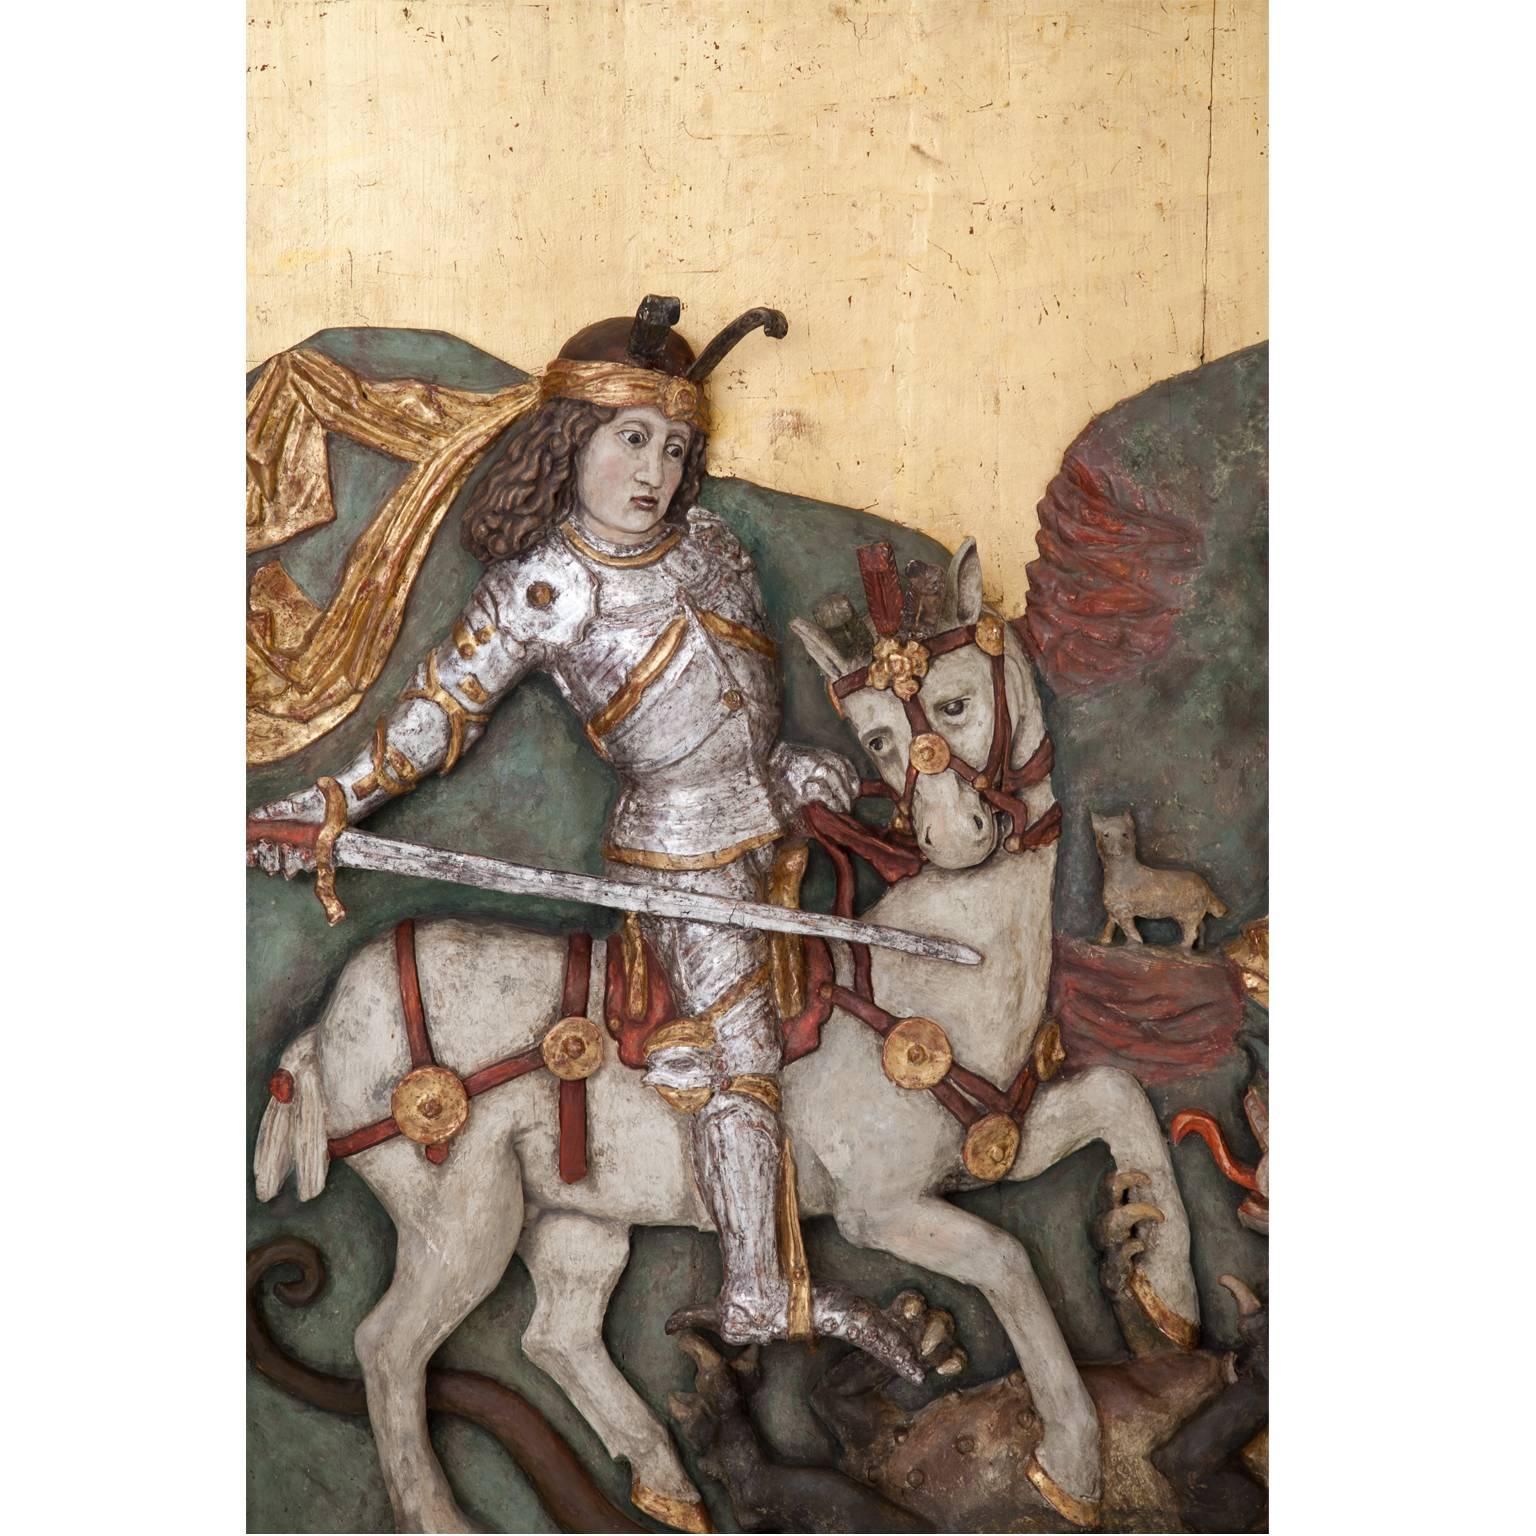 Large poylchrome relief depicting Saint George on his horse, slaying the dragon. In the background on the right is the benefactress. The back panel is probably from the 1950s. 
Size without frame: 122 x 100 cm.